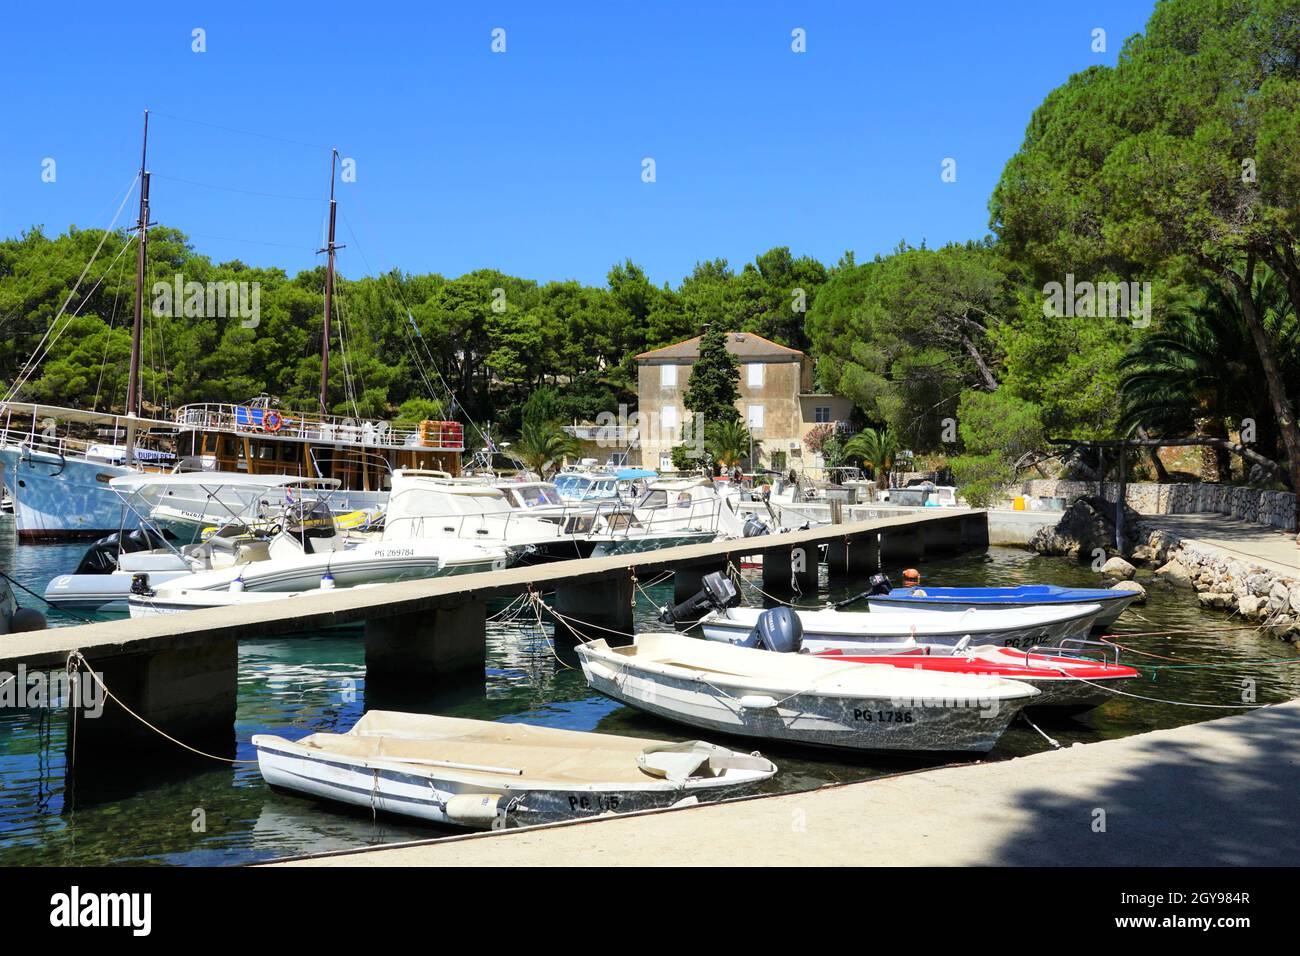 Mandre, Croatia 18th August, 2021. A beautiful picturesque seaport in a small coastal town on a sunny summer day Stock Photo